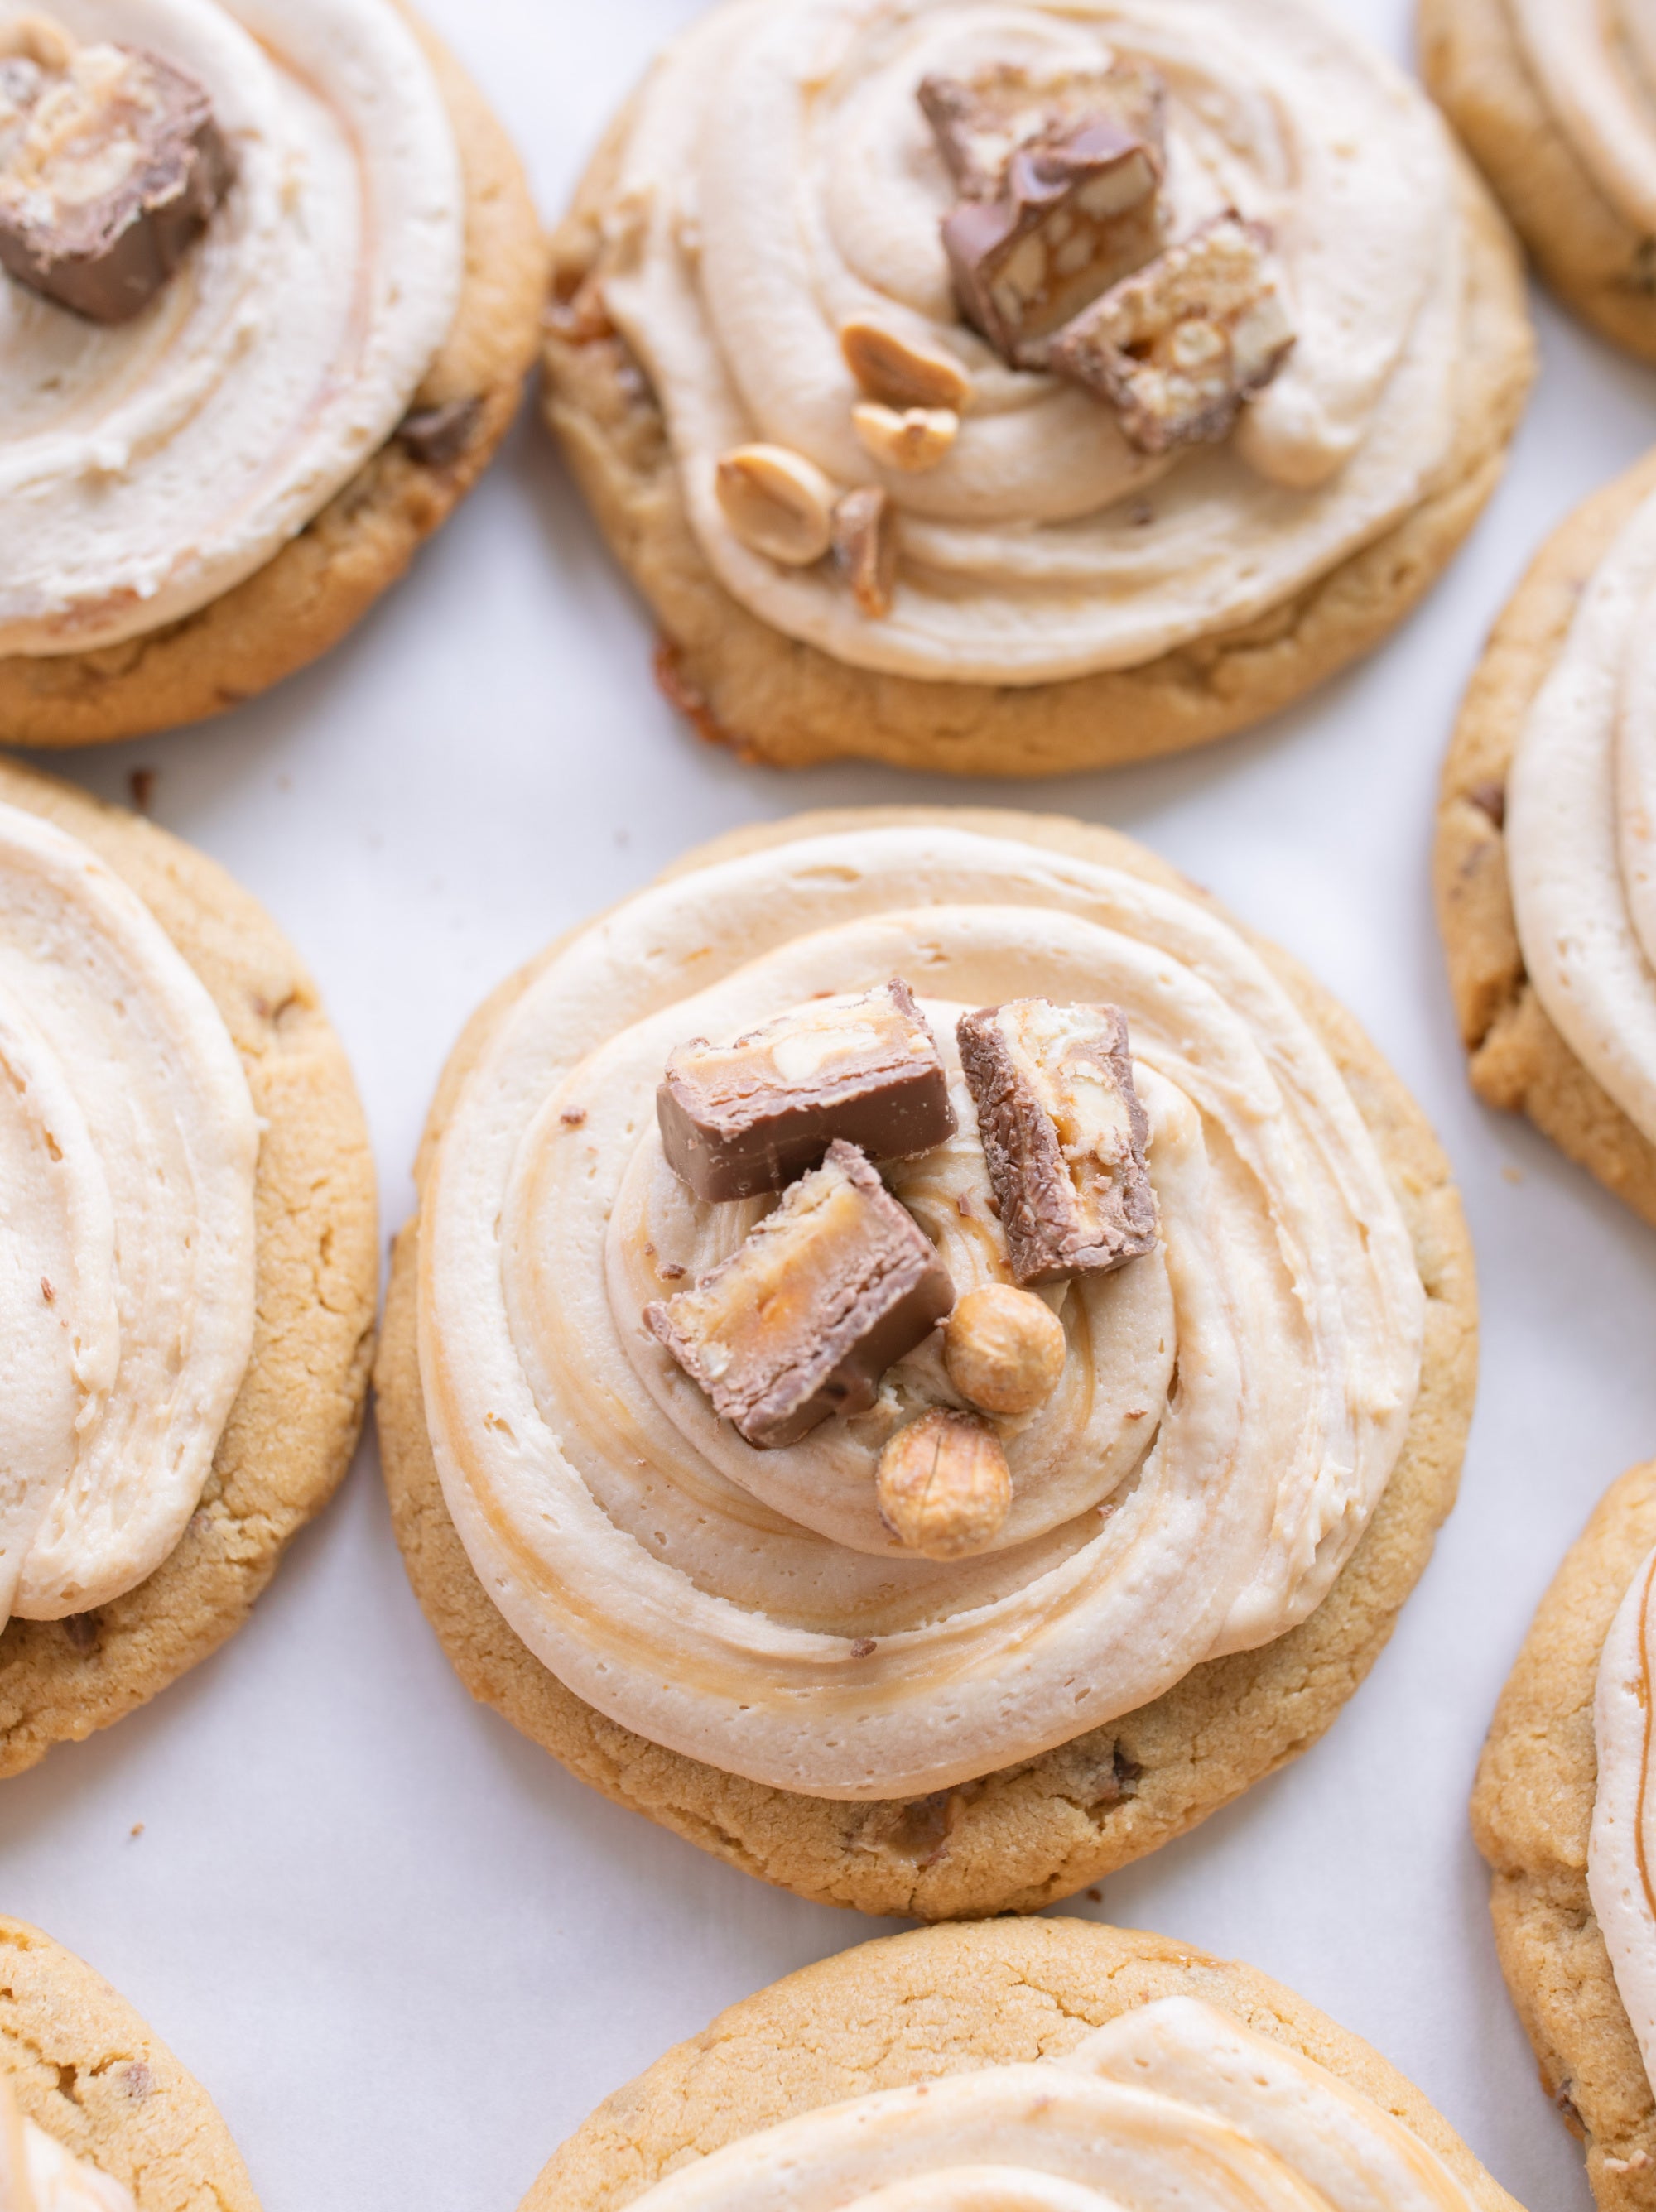 Frosted Peanut Butter Carmel Snickers Cookies